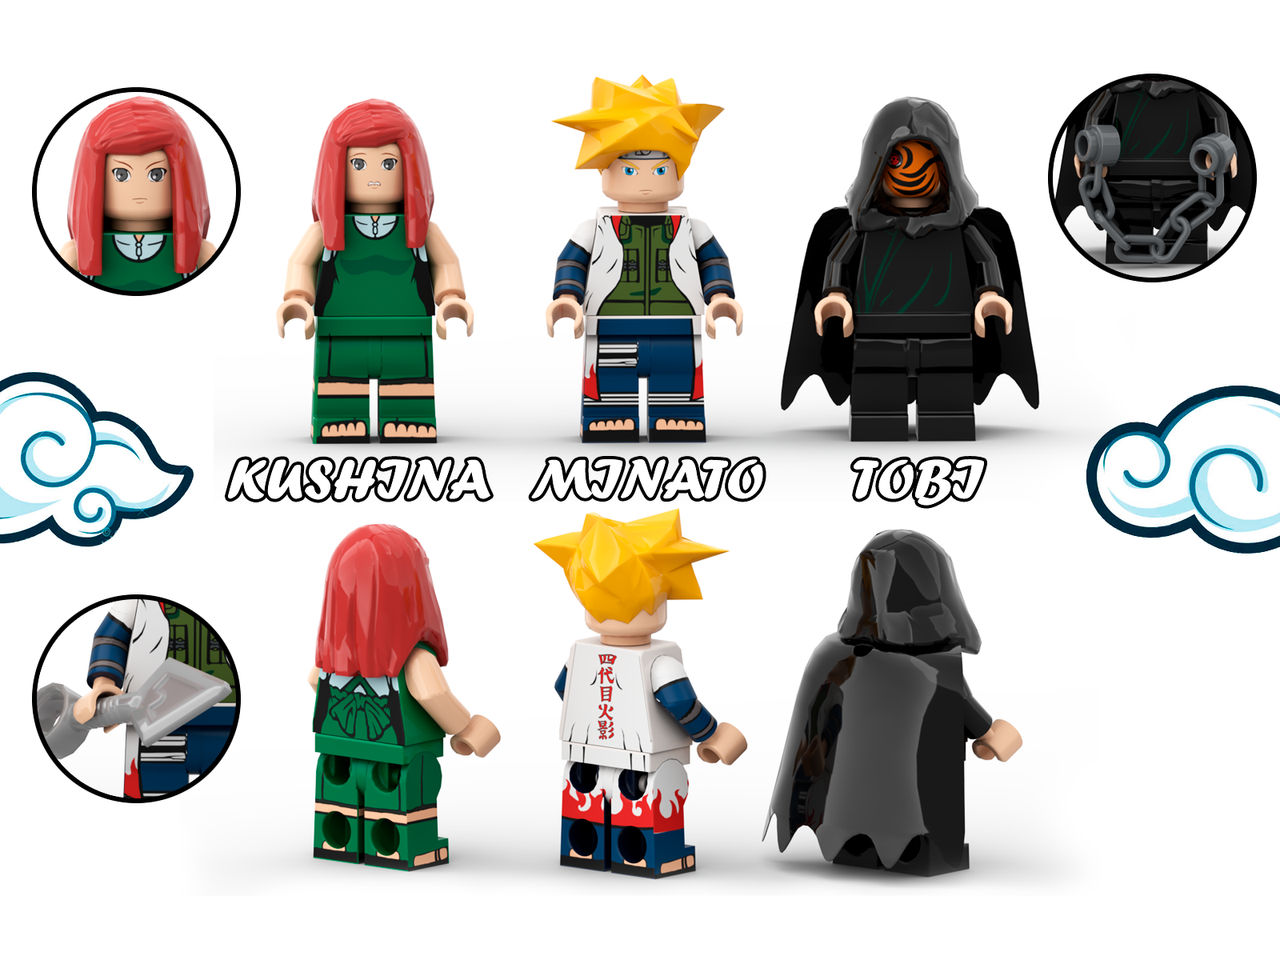 Lego - NARUTO: ATTACK OF THE NINE TAILS by Aggravat0r on DeviantArt